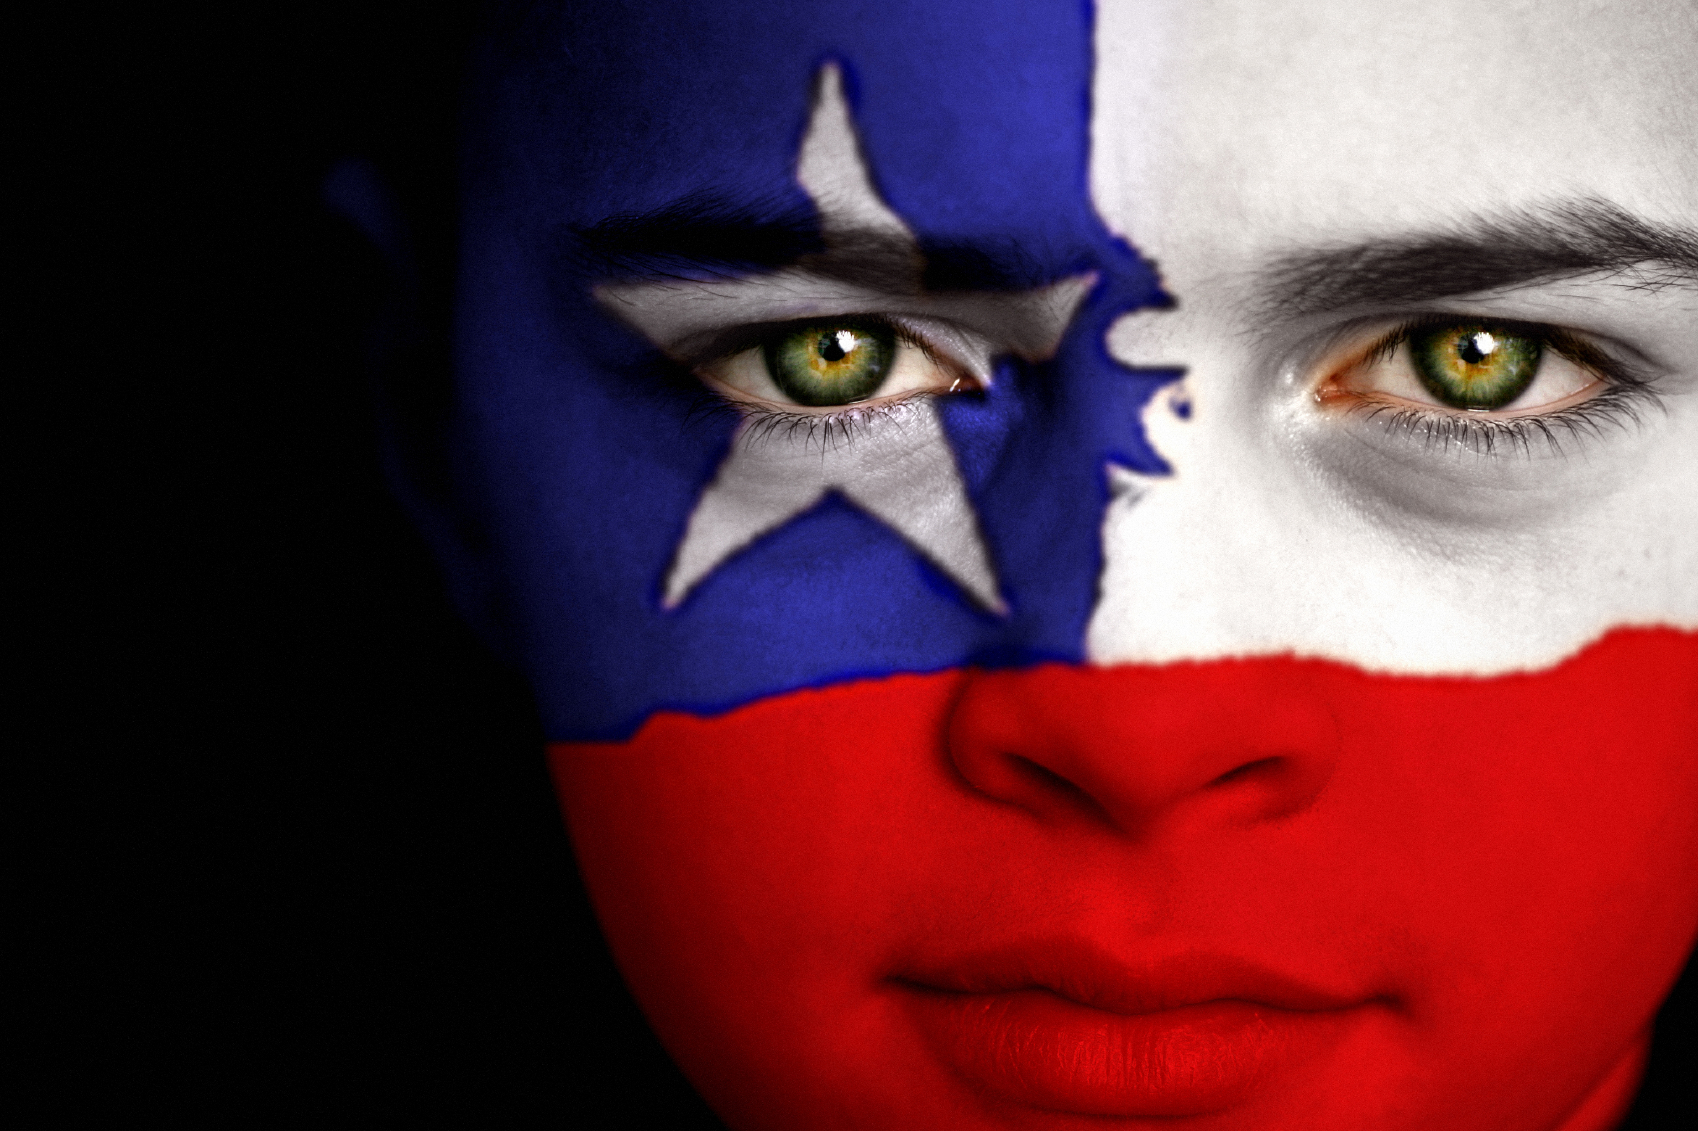 Portrait of a boy with the flag of Chile painted on his face.